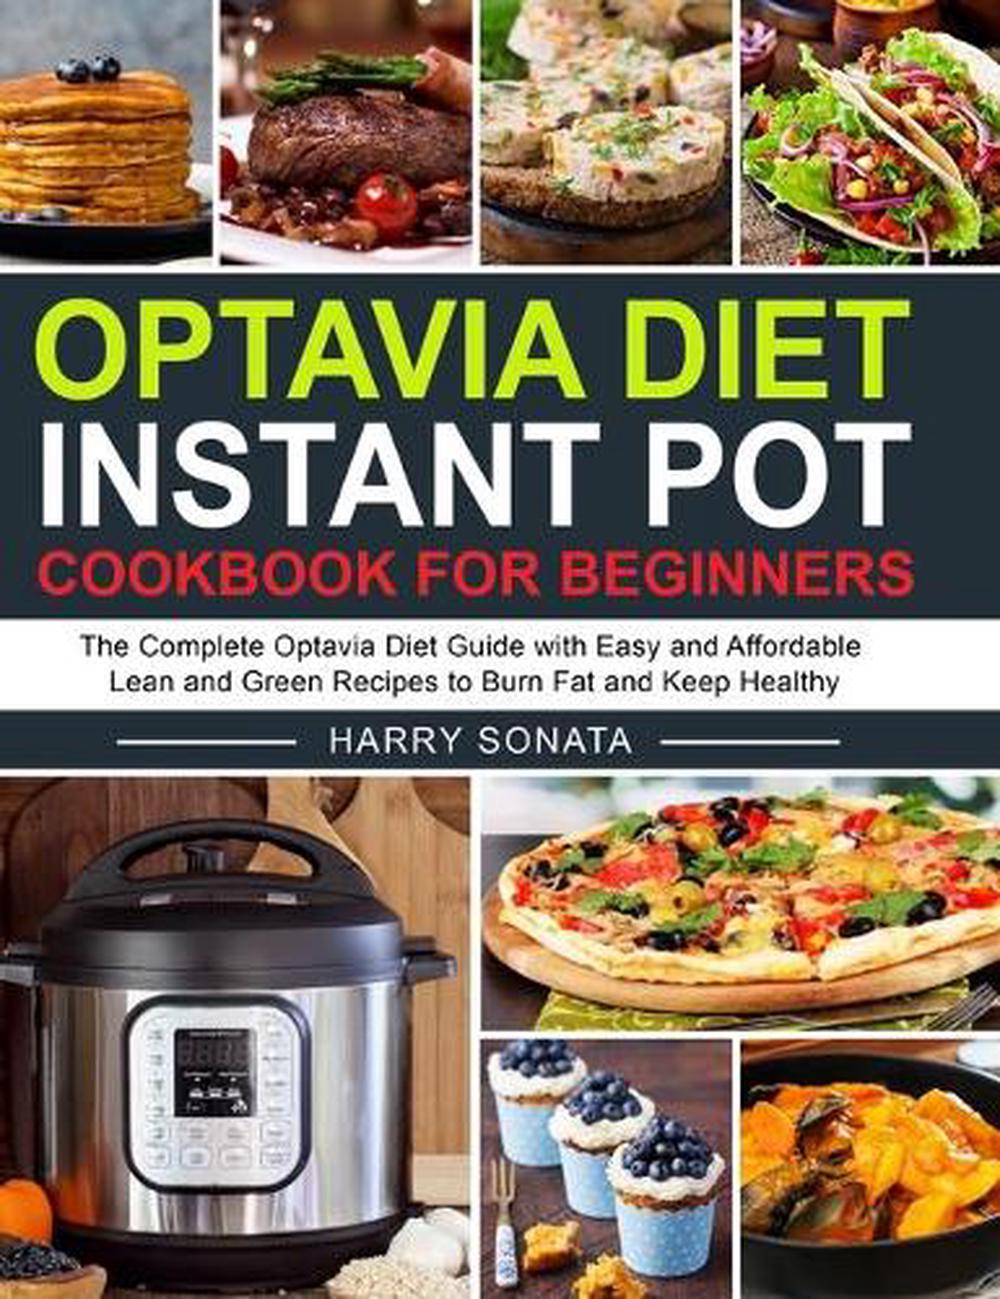 Optavia Diet Instant Pot Cookbook for Beginners by Harry Sonata